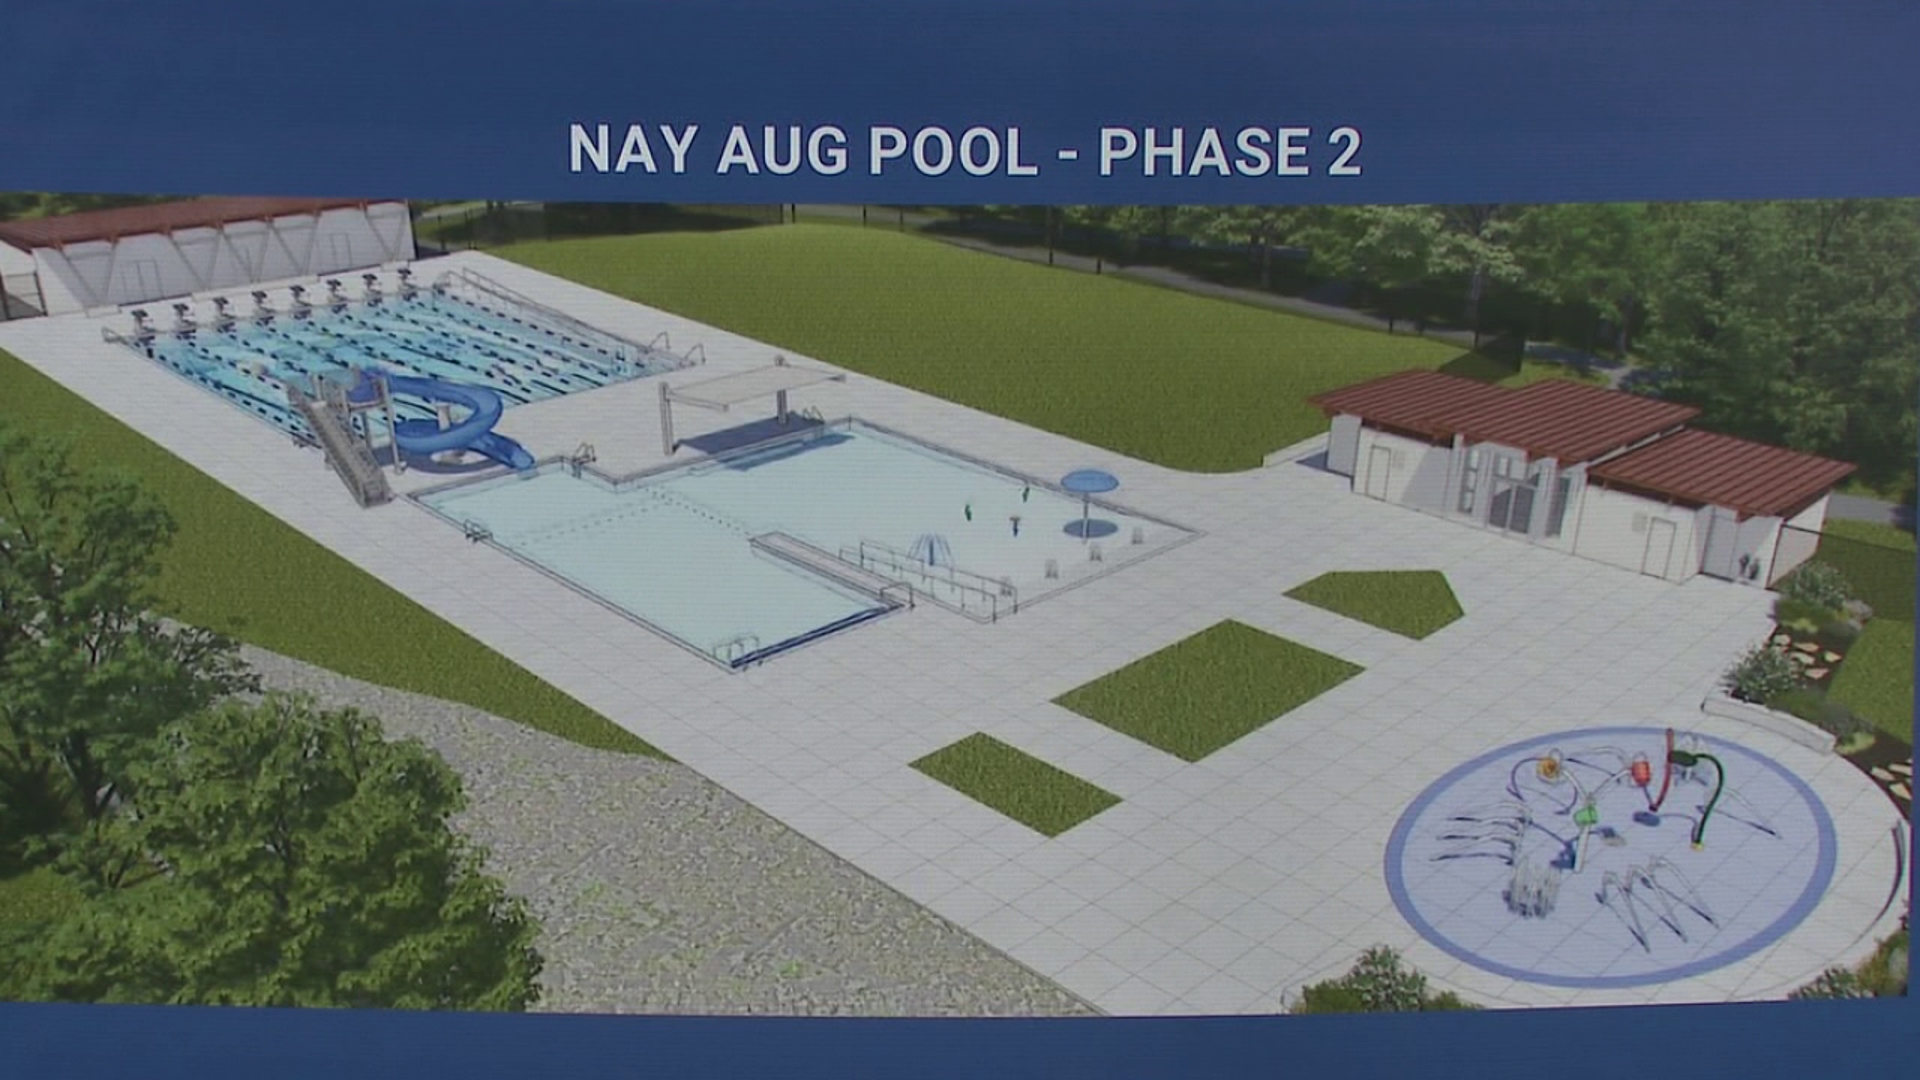 City officials gathered at Nay Aug Park in Scranton on Wednesday to unveil plans for a new pool complex.